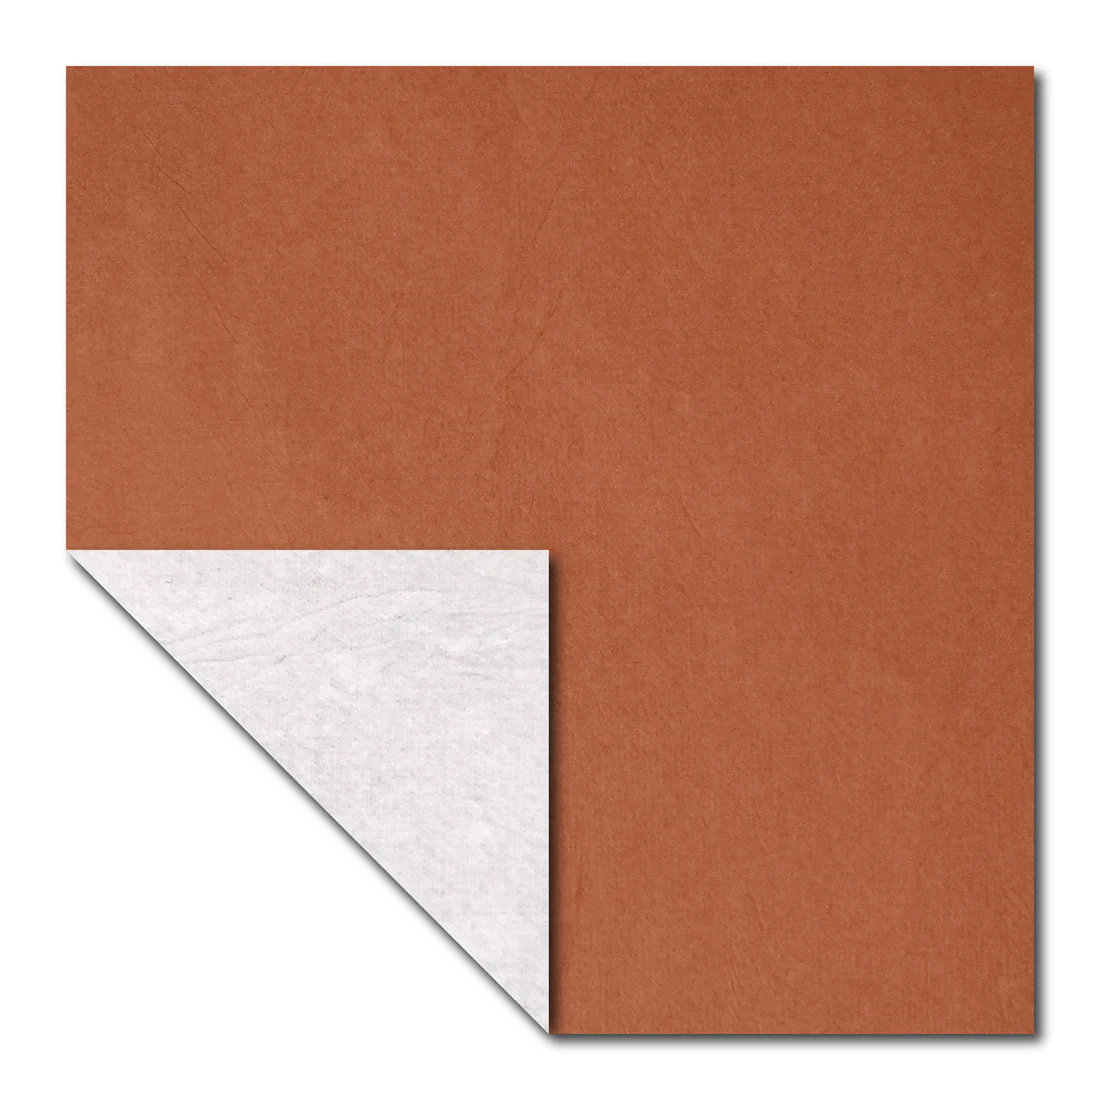 50 Sheets Origami Paper Double Sided 8x8 Inch Square Sheet, Brown